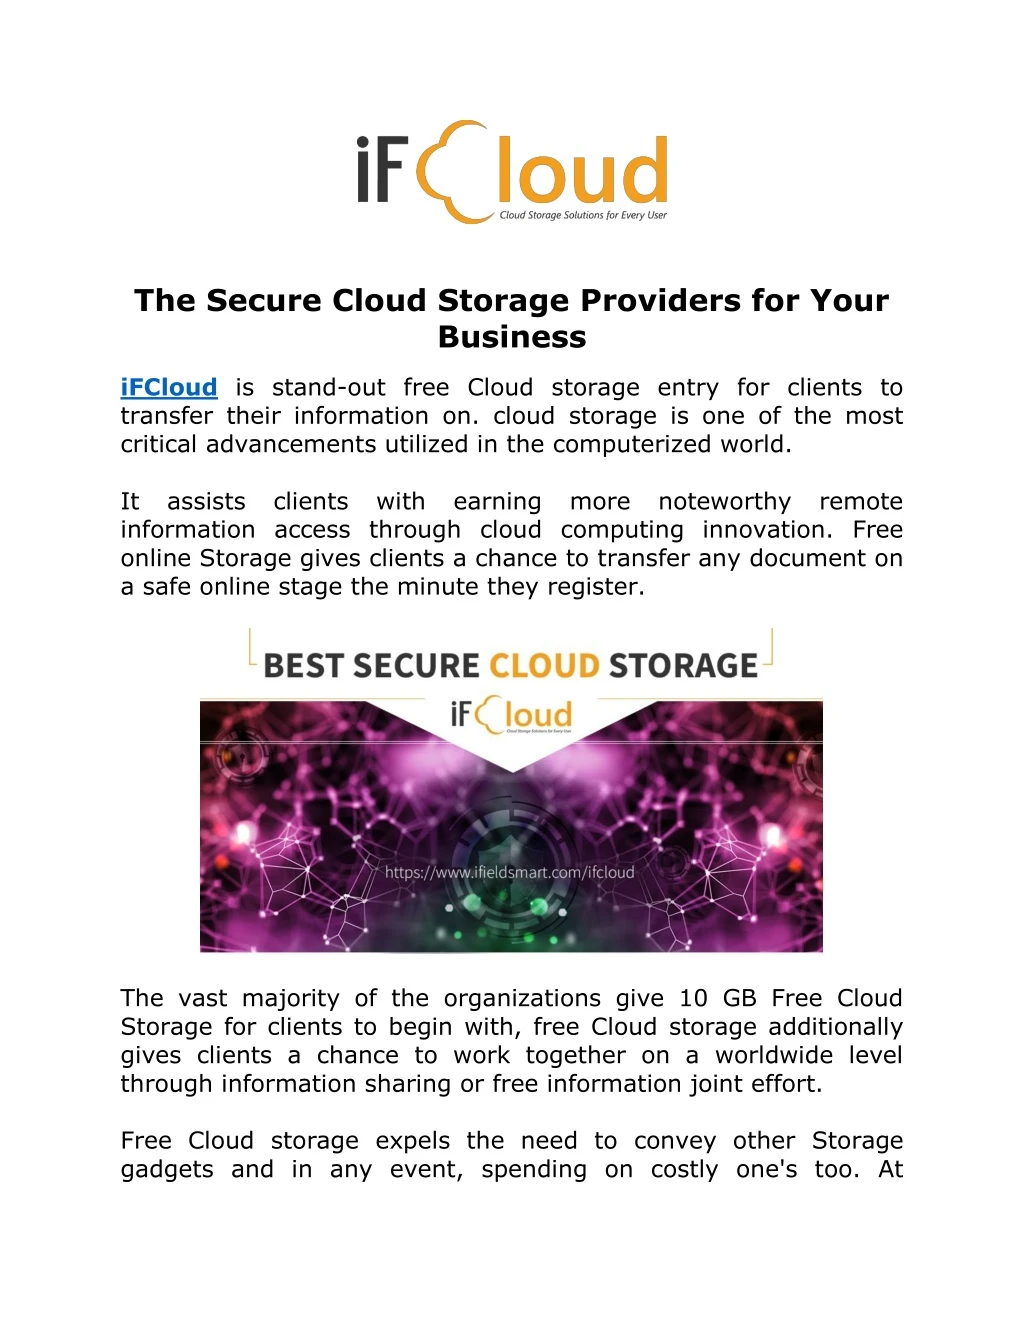 the secure cloud storage providers for your